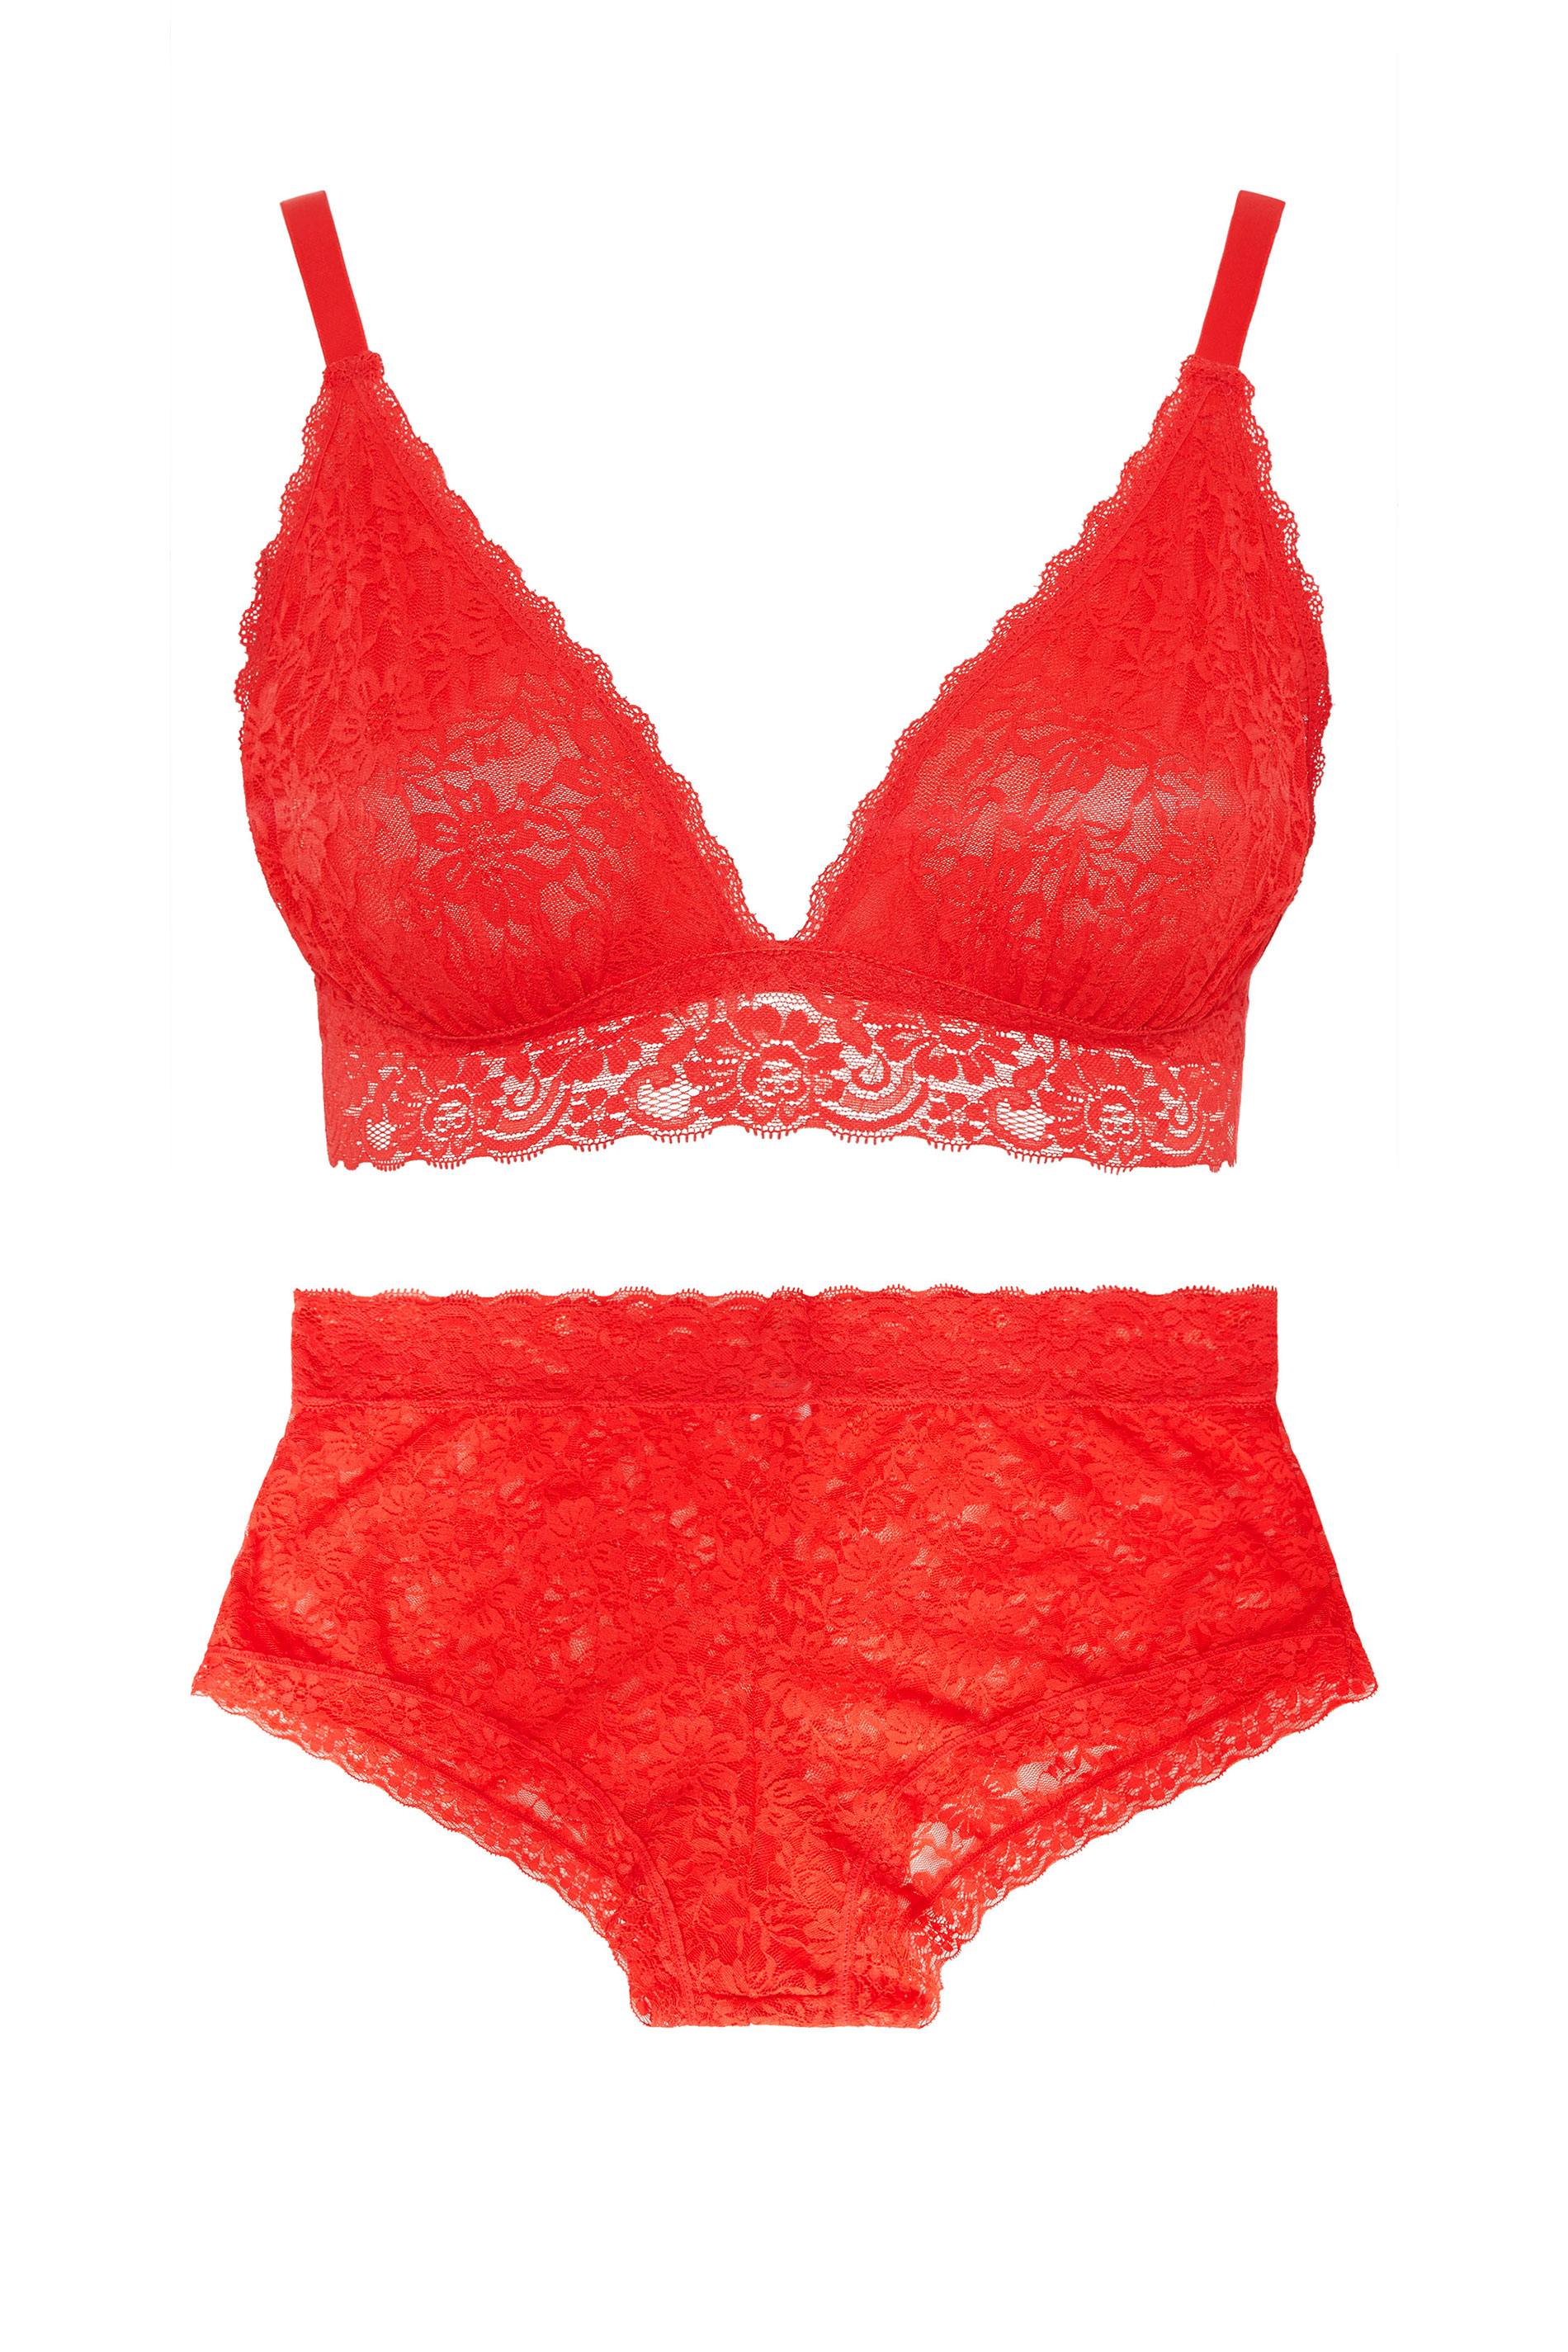 YOURS Curve Red Lace Triangle Bralette Lingerie Set